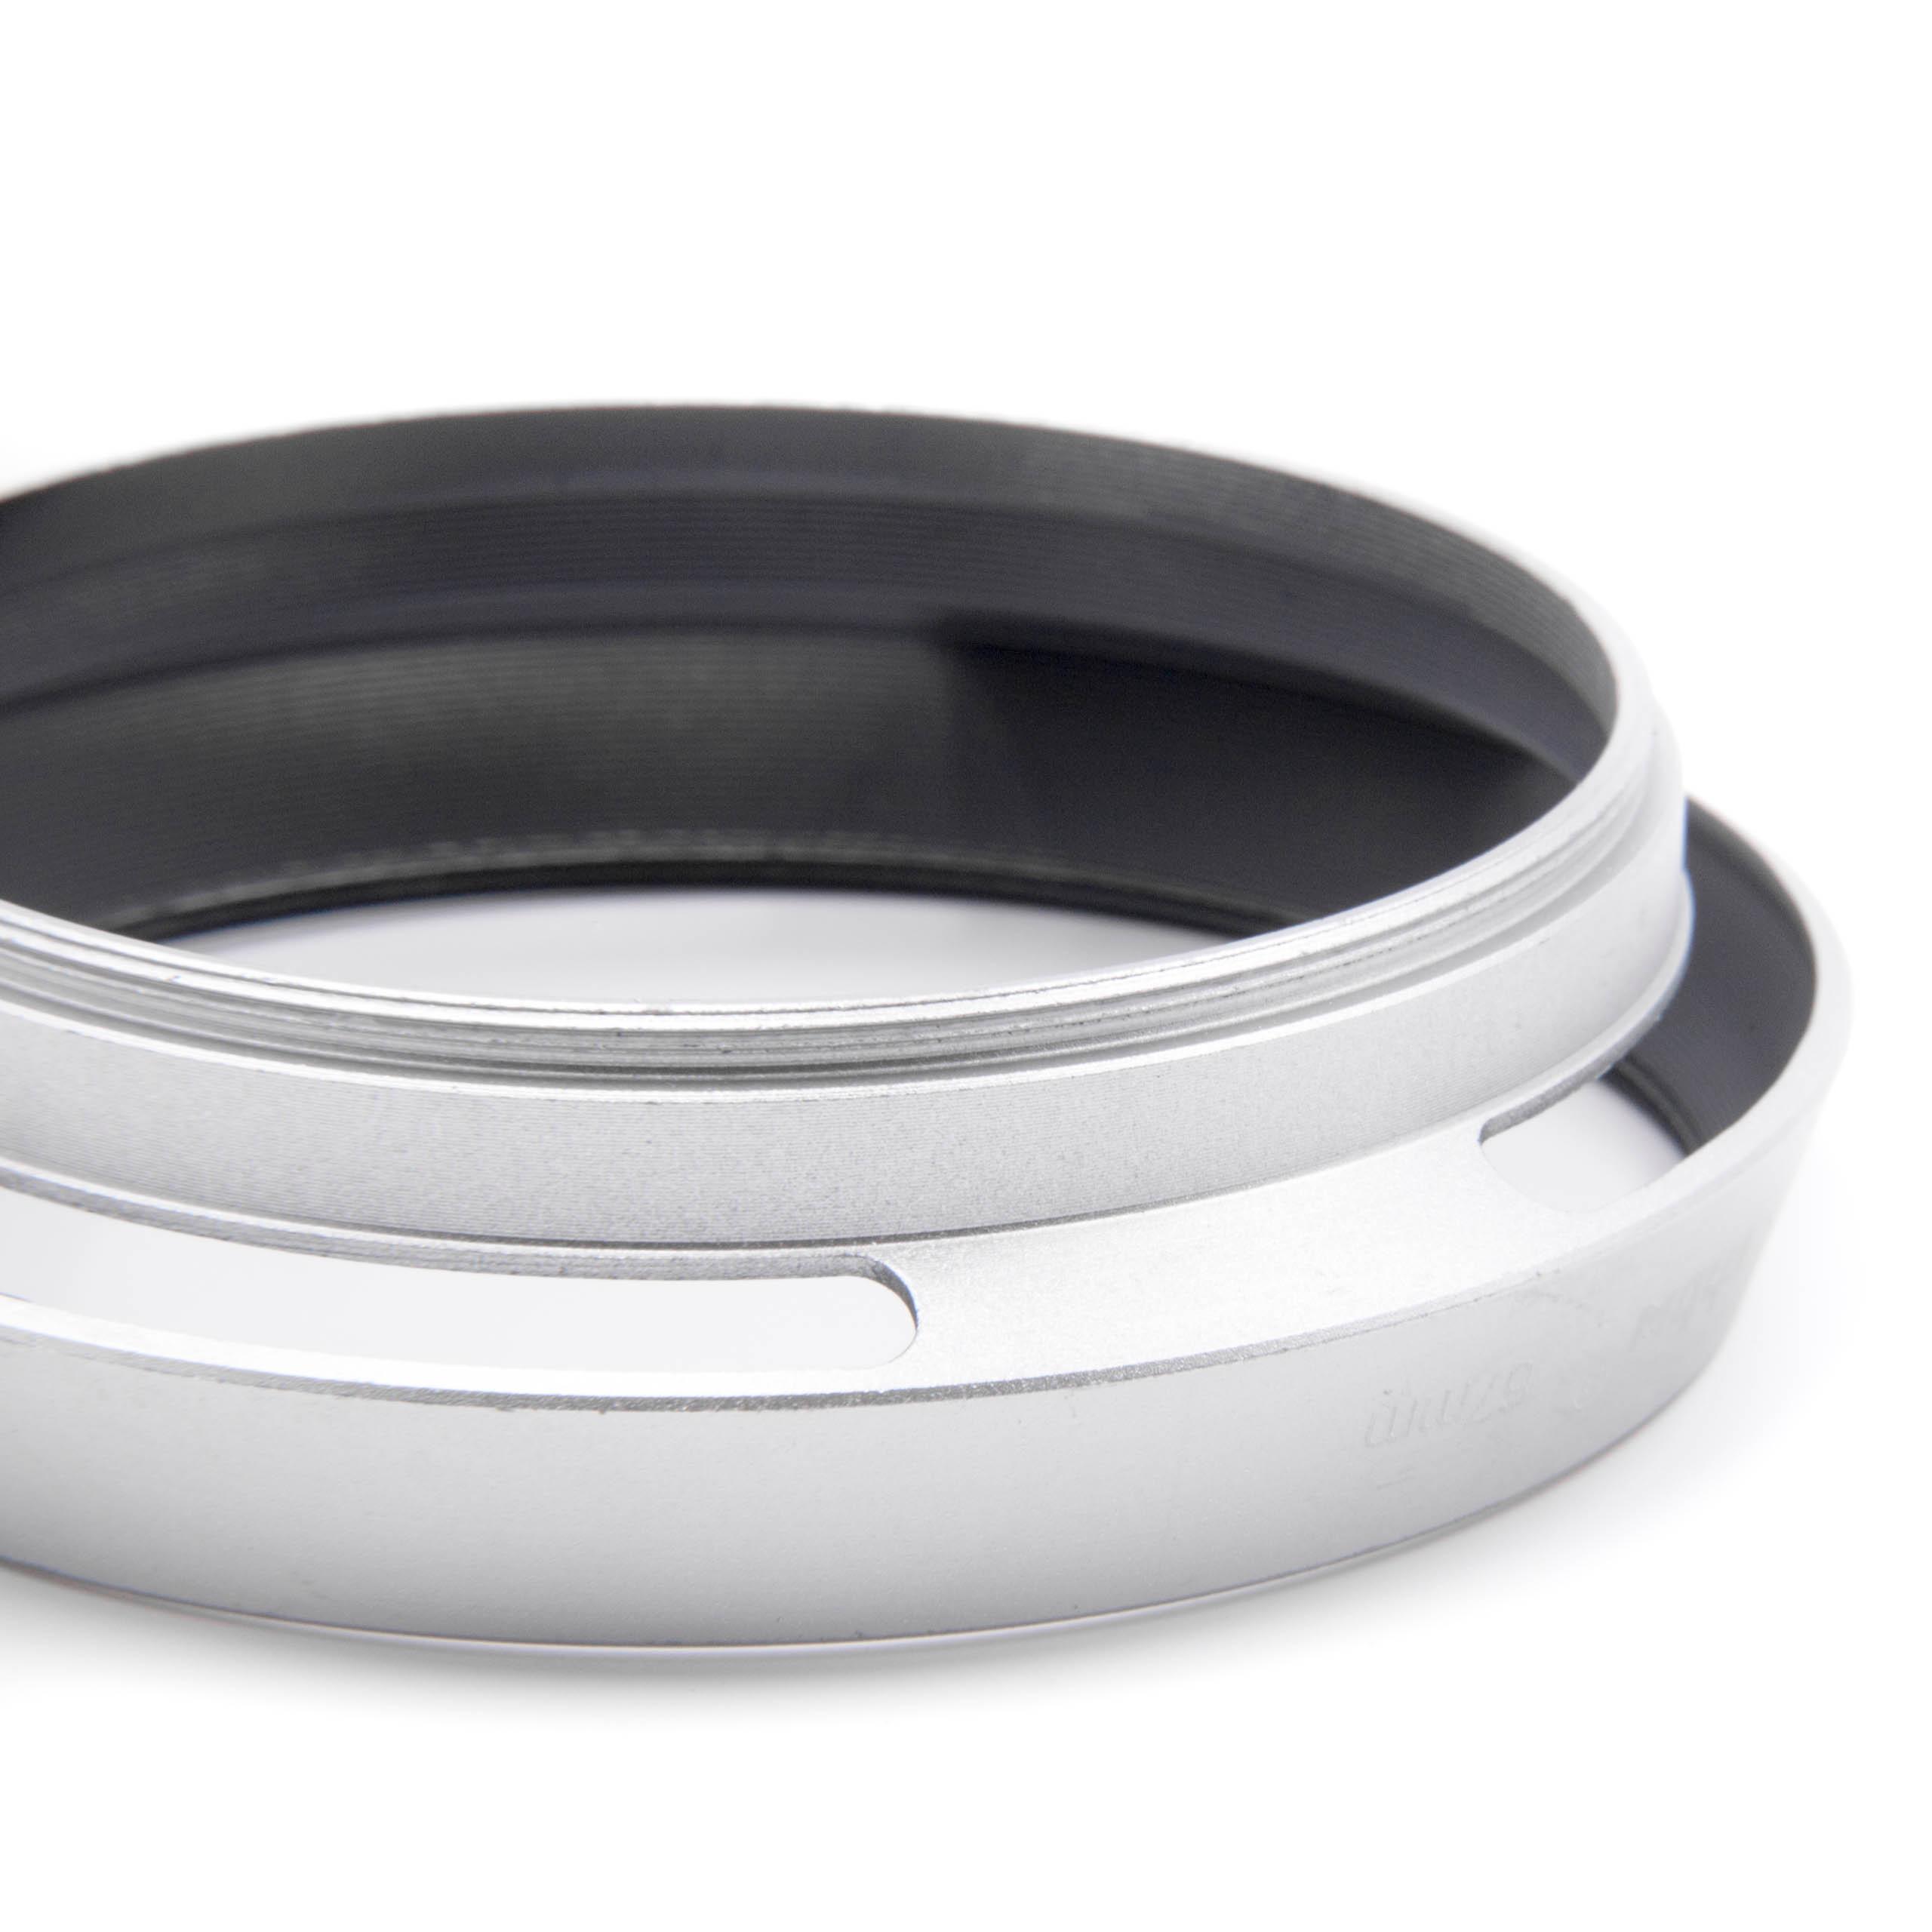 Lens Hood suitable for 67mm Lens - Lens Shade Silver, Round